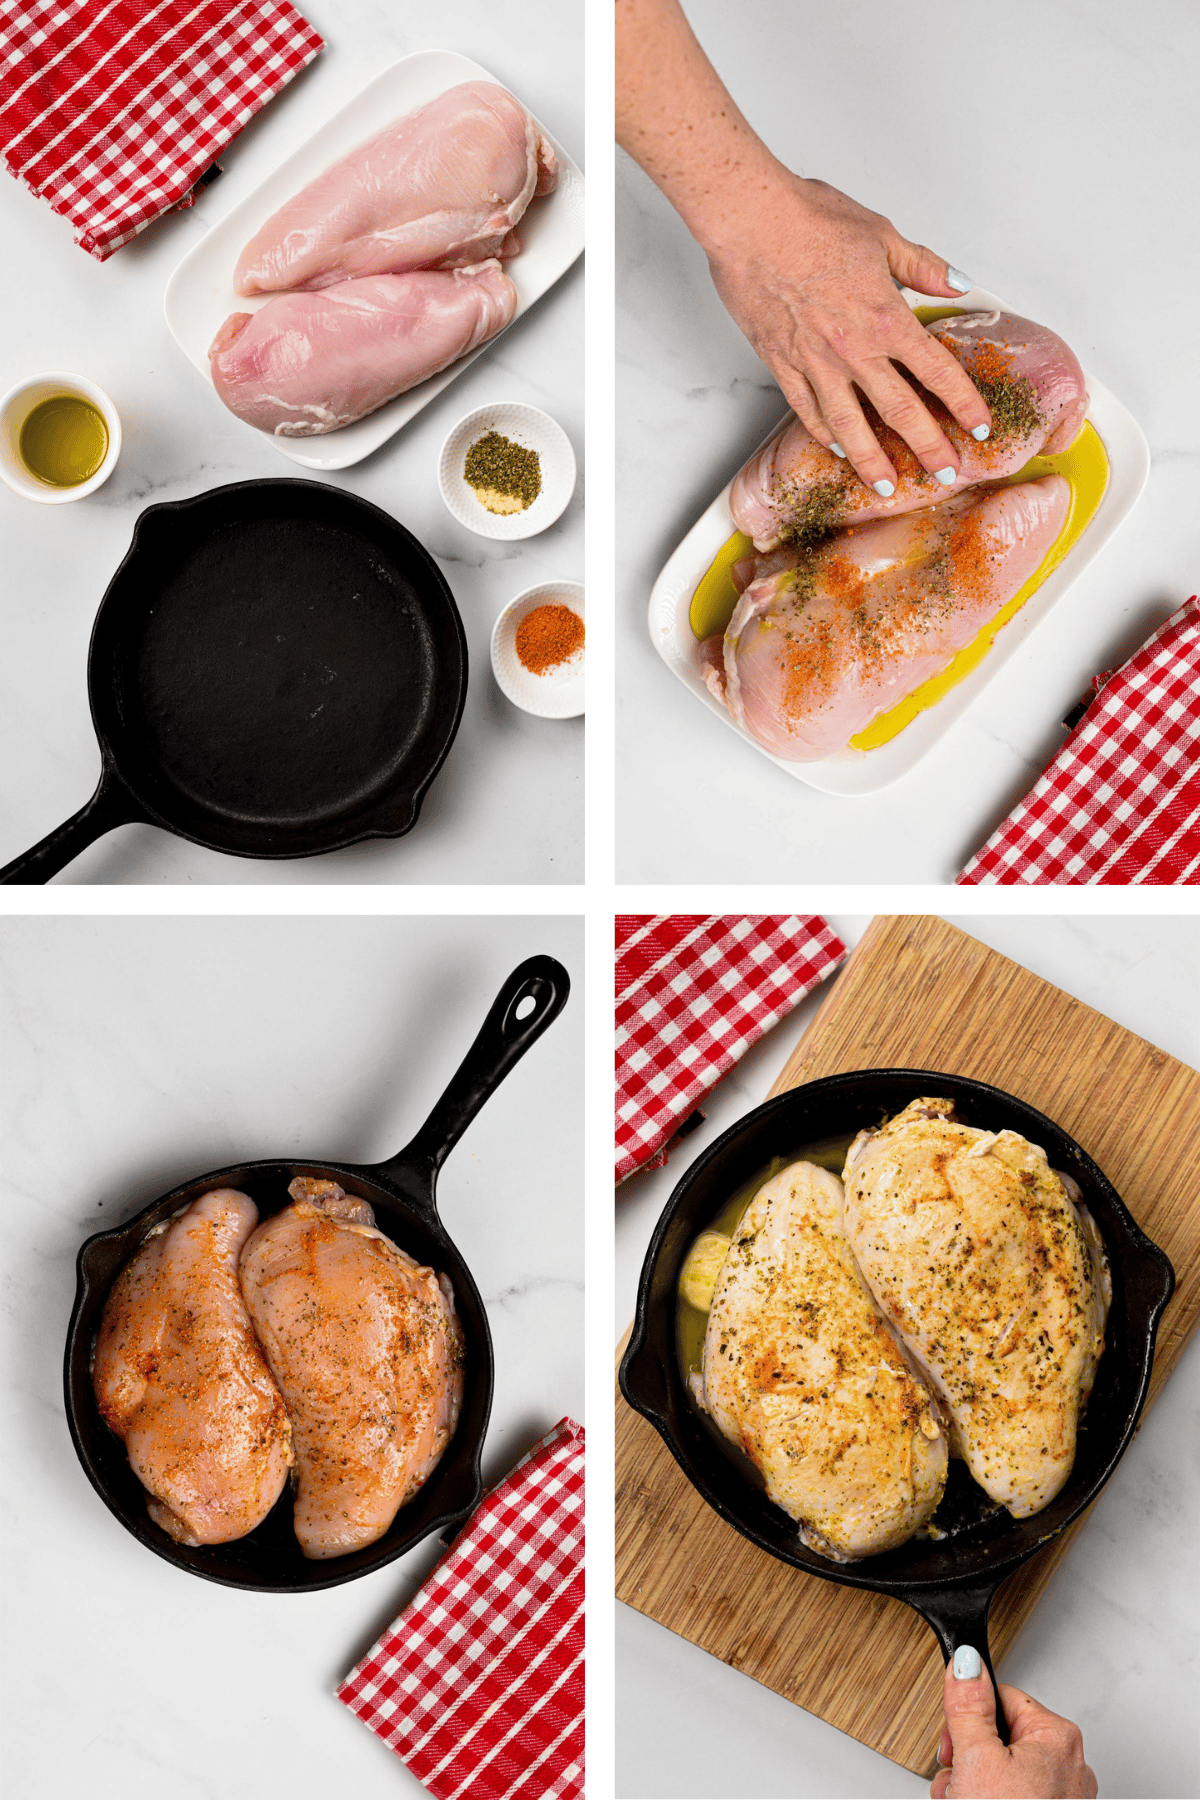 Step-by-step instructions to Making Cast Iron Chicken